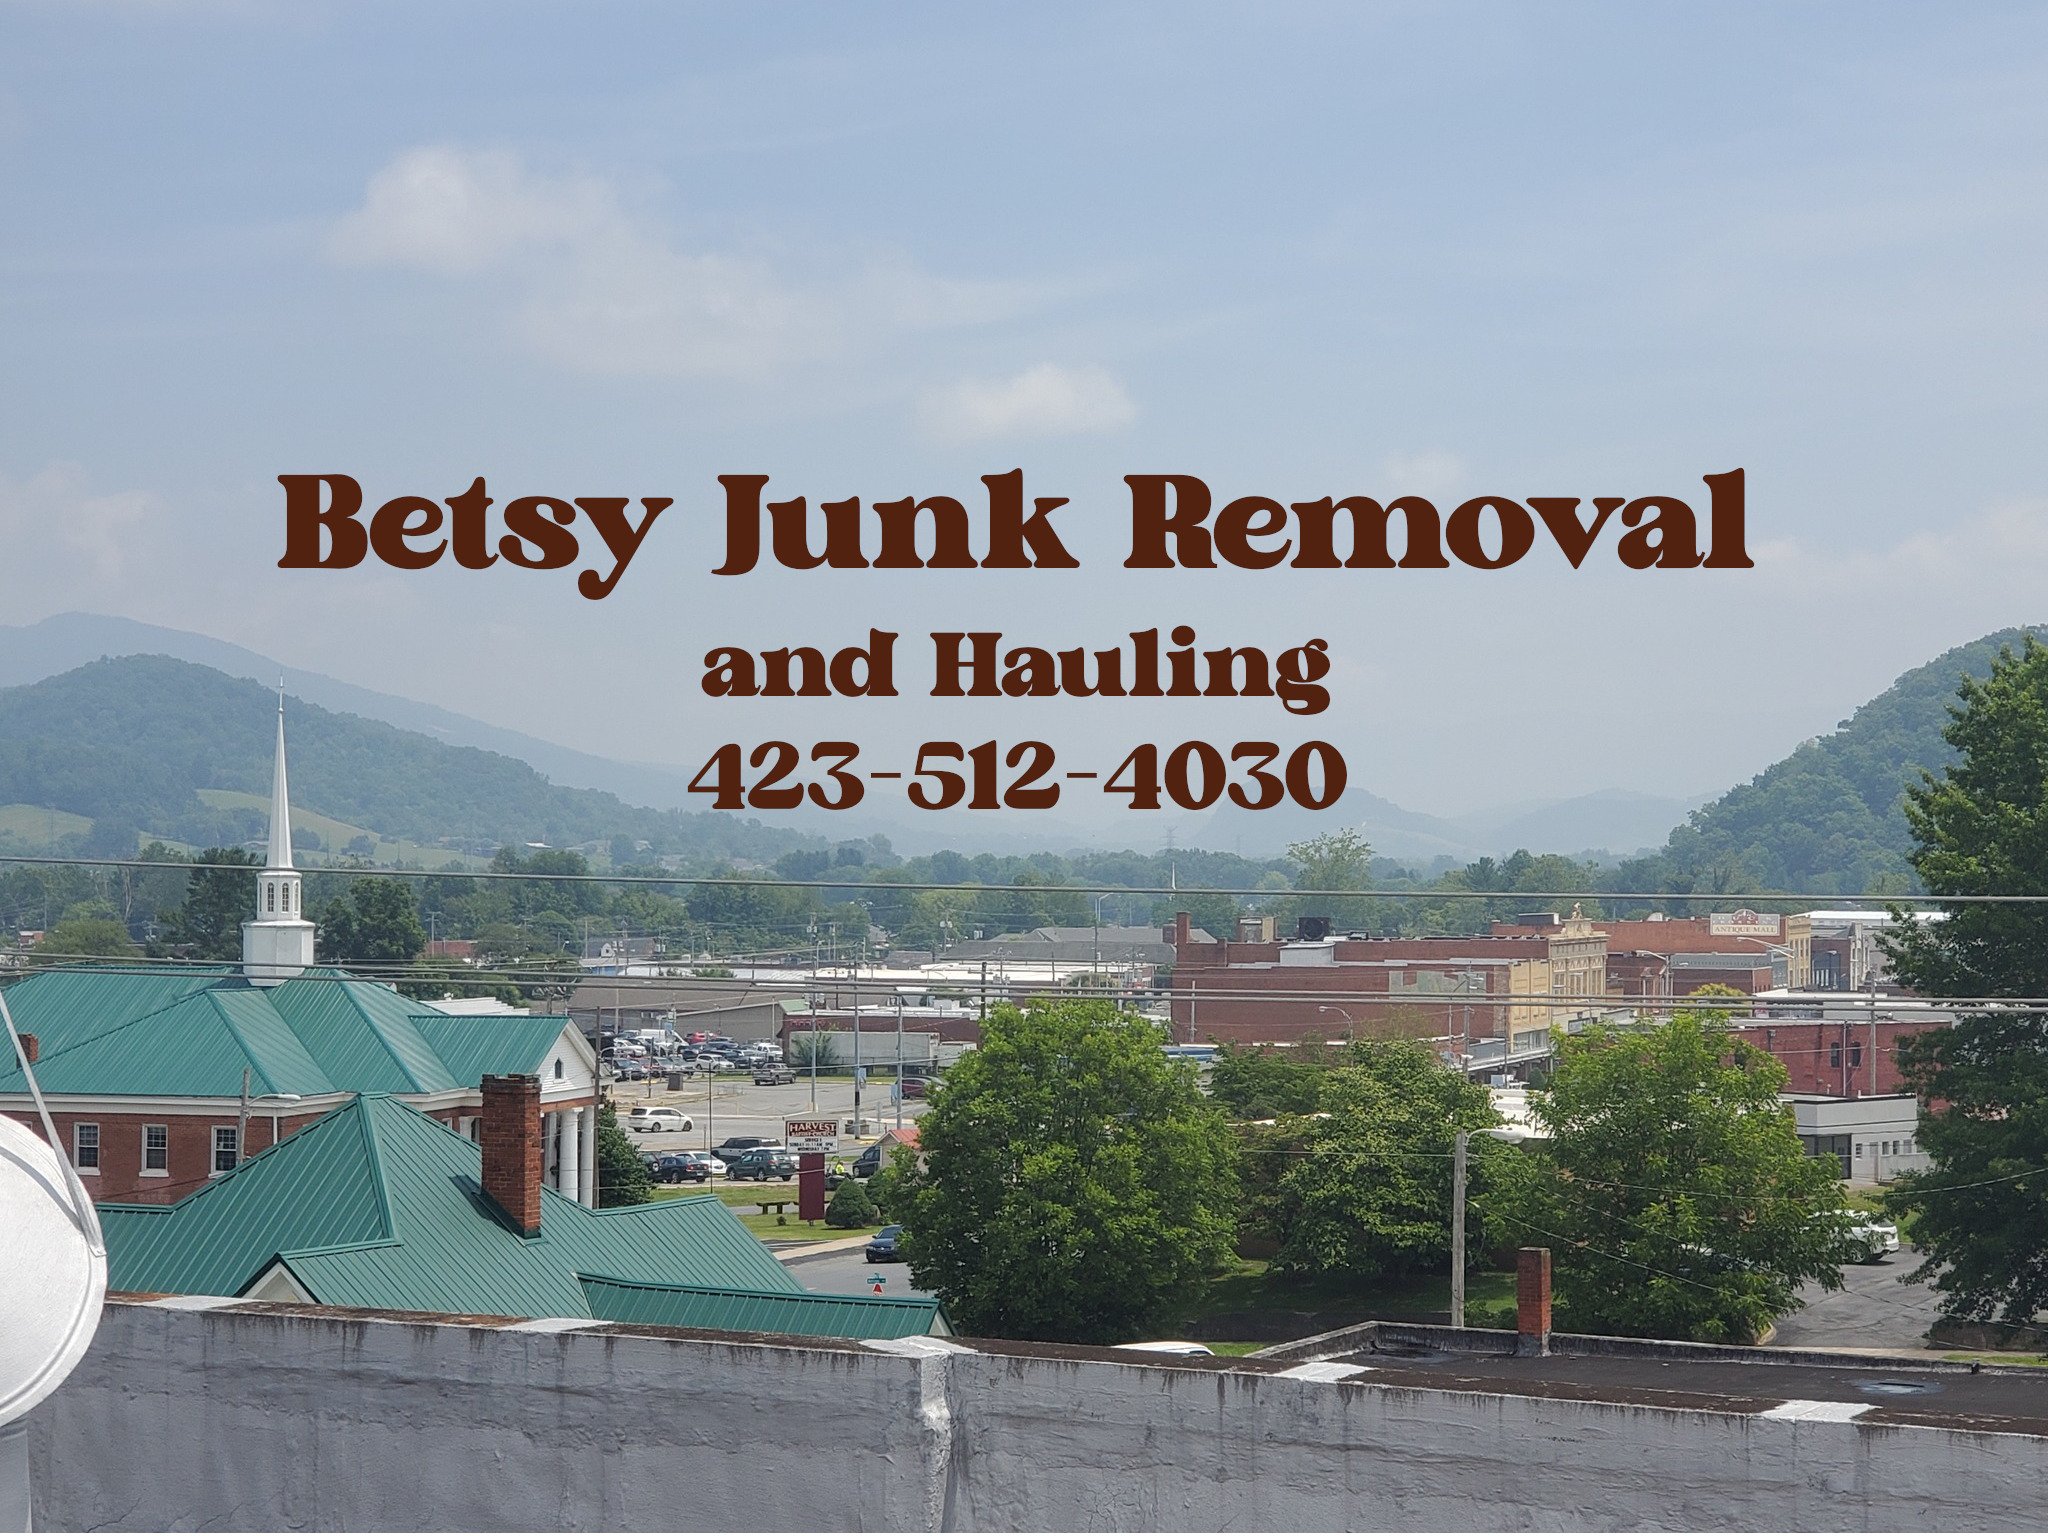 Betsy Junk Removal and Hauling Logo